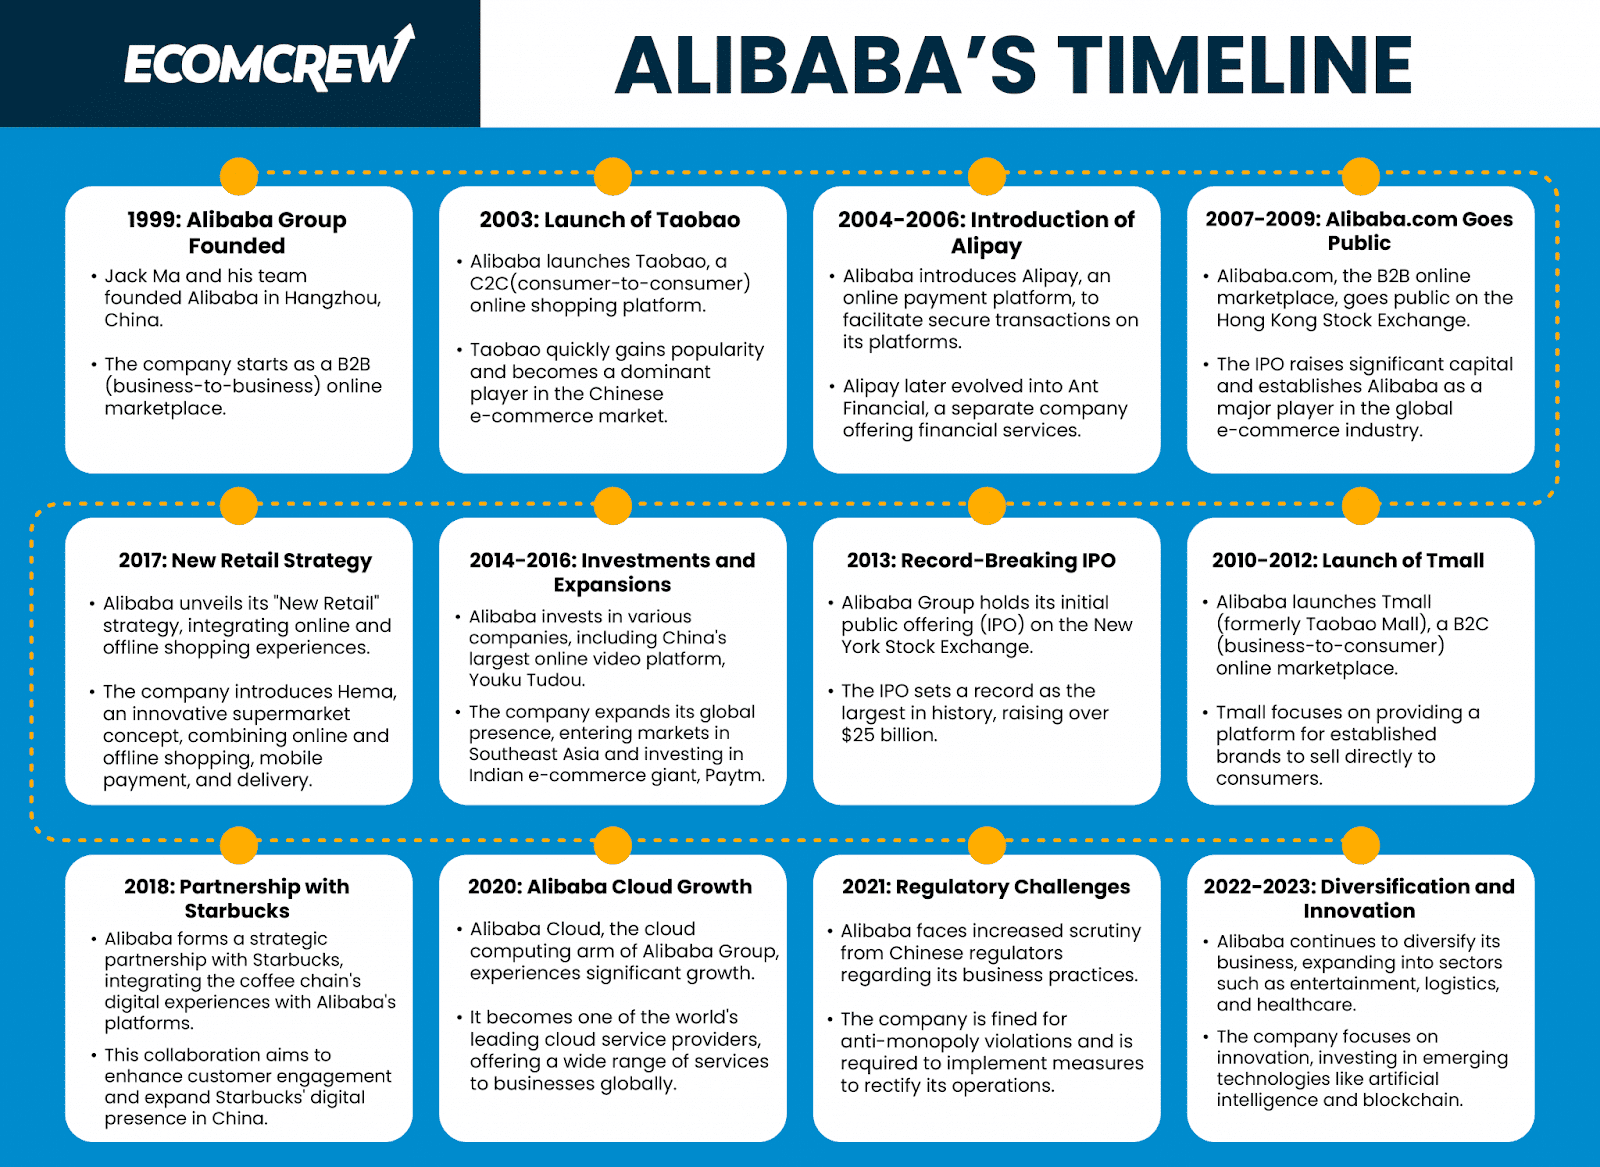 Alibaba's timeline up to 2023